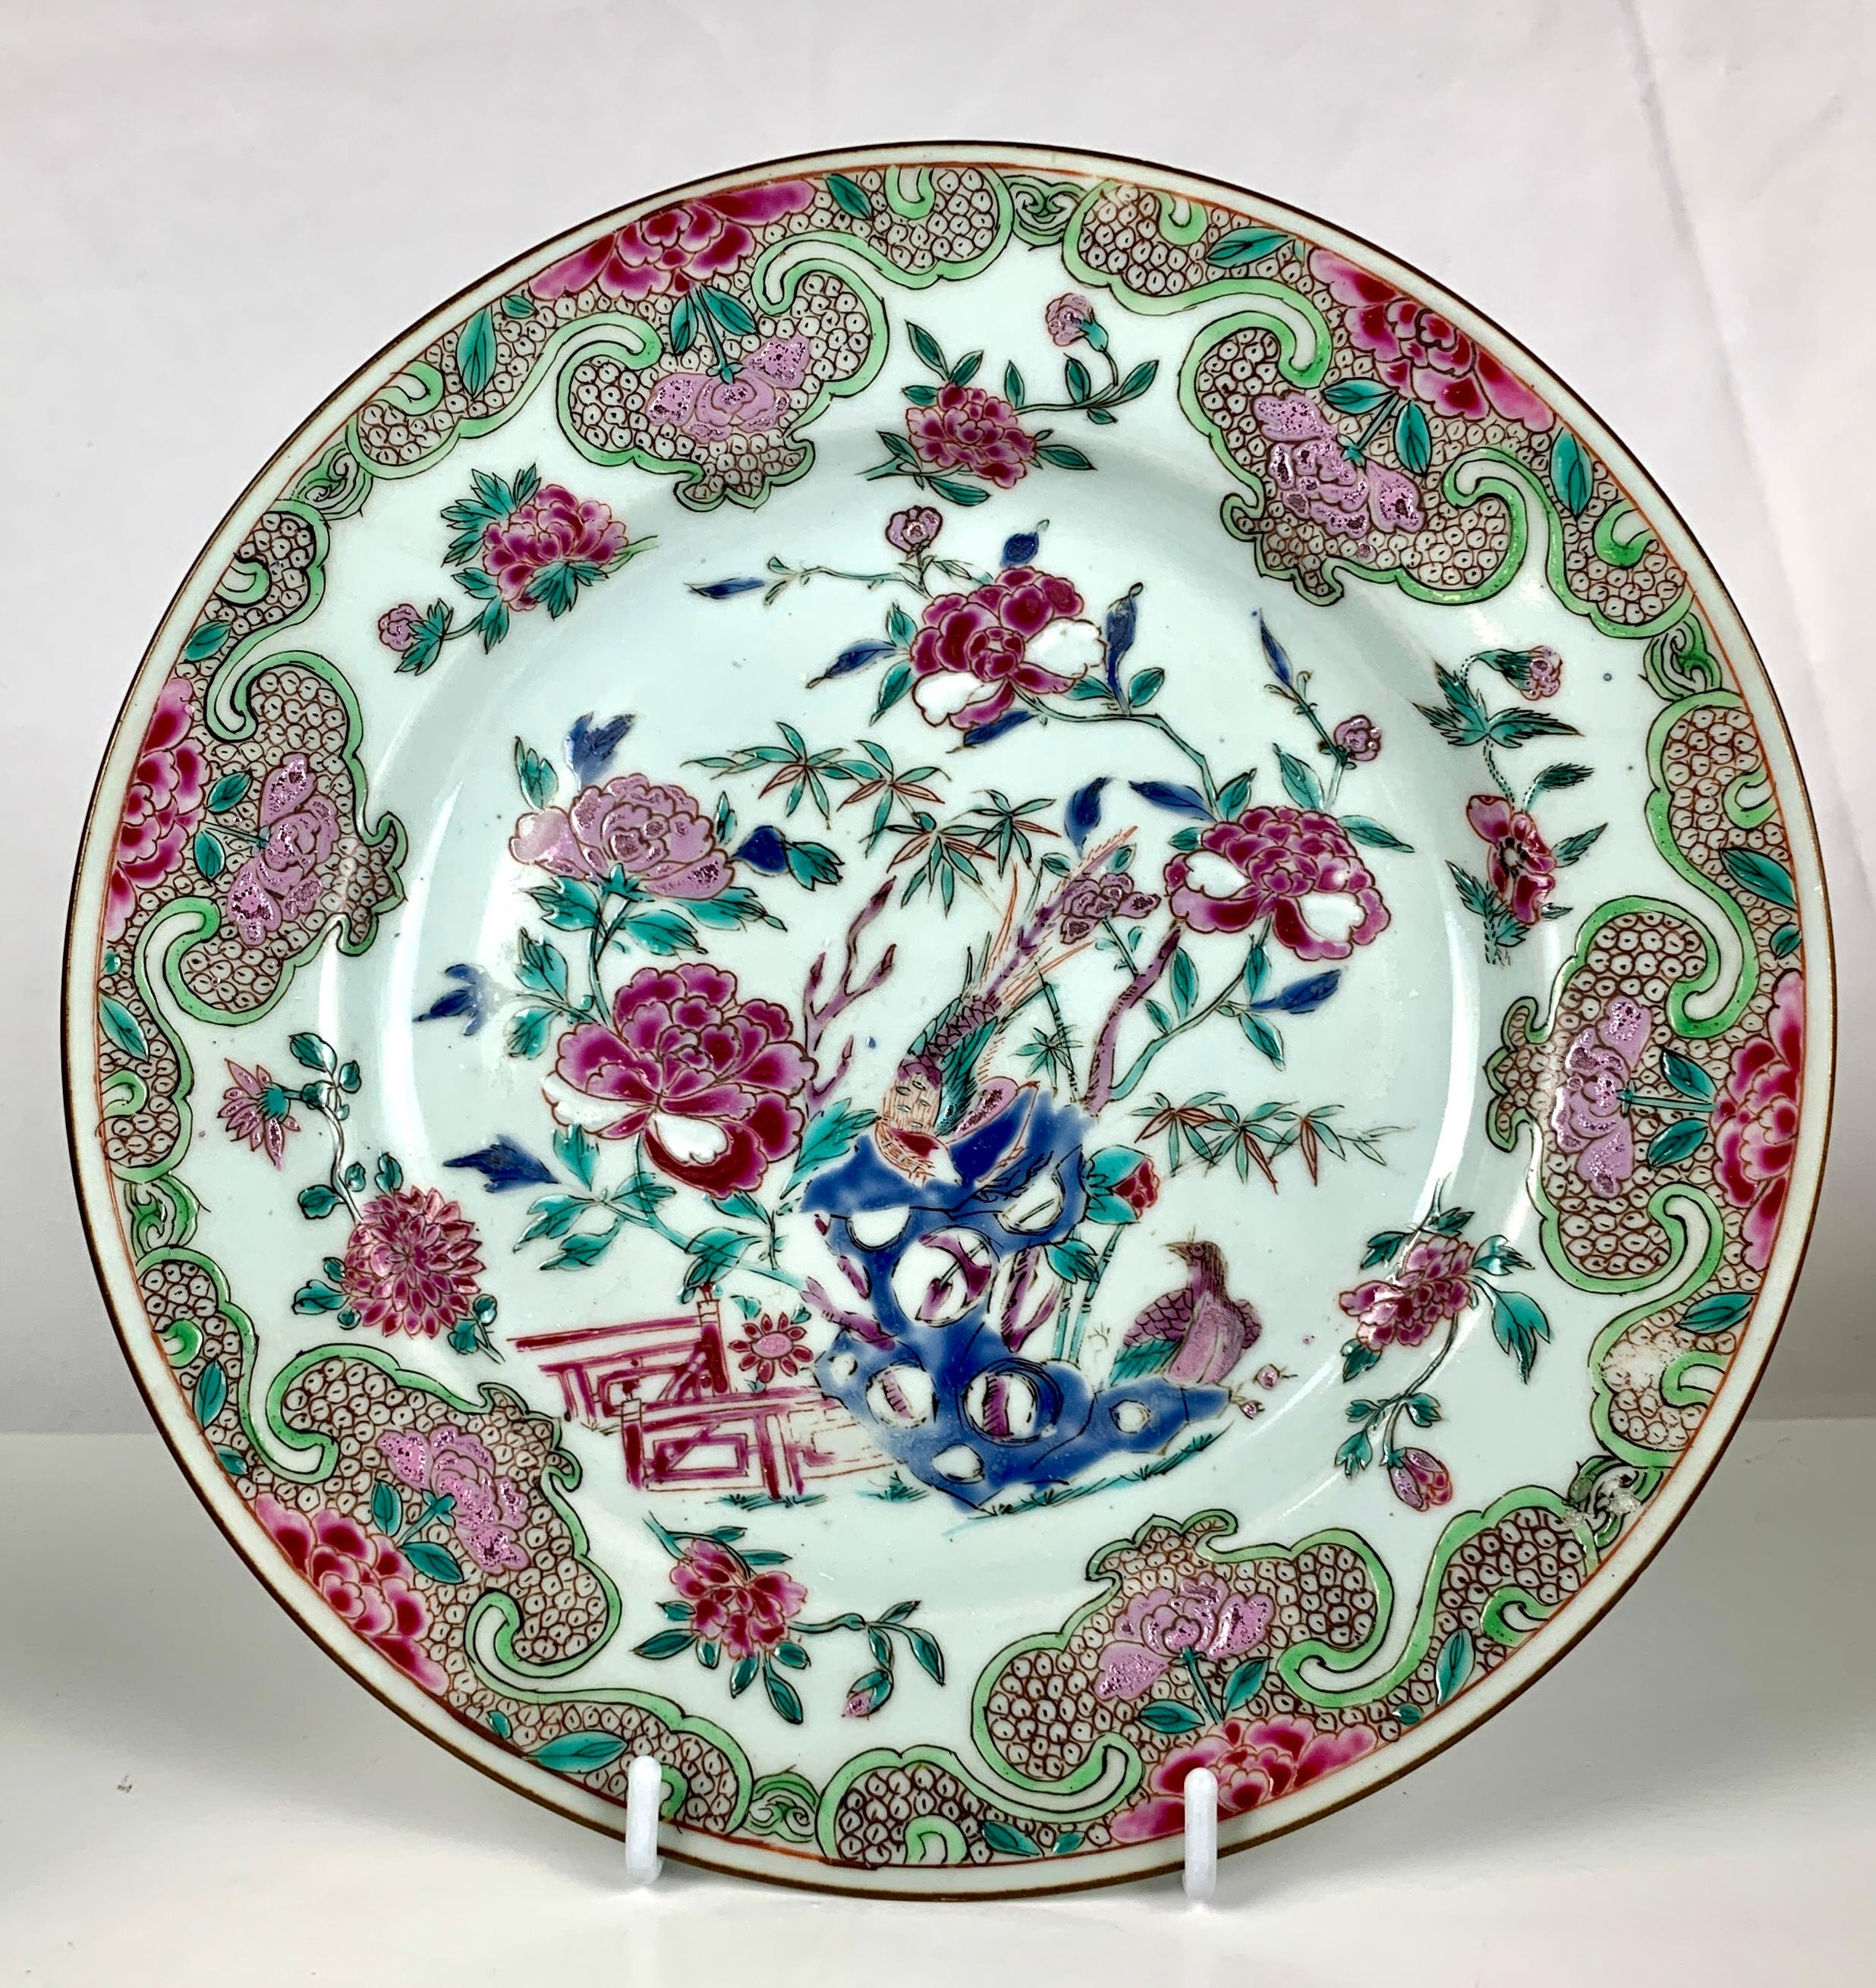 Qing Pair Antique Chinese Porcelain Dishes Hand-Painted Made 18th Century, Circa 1770